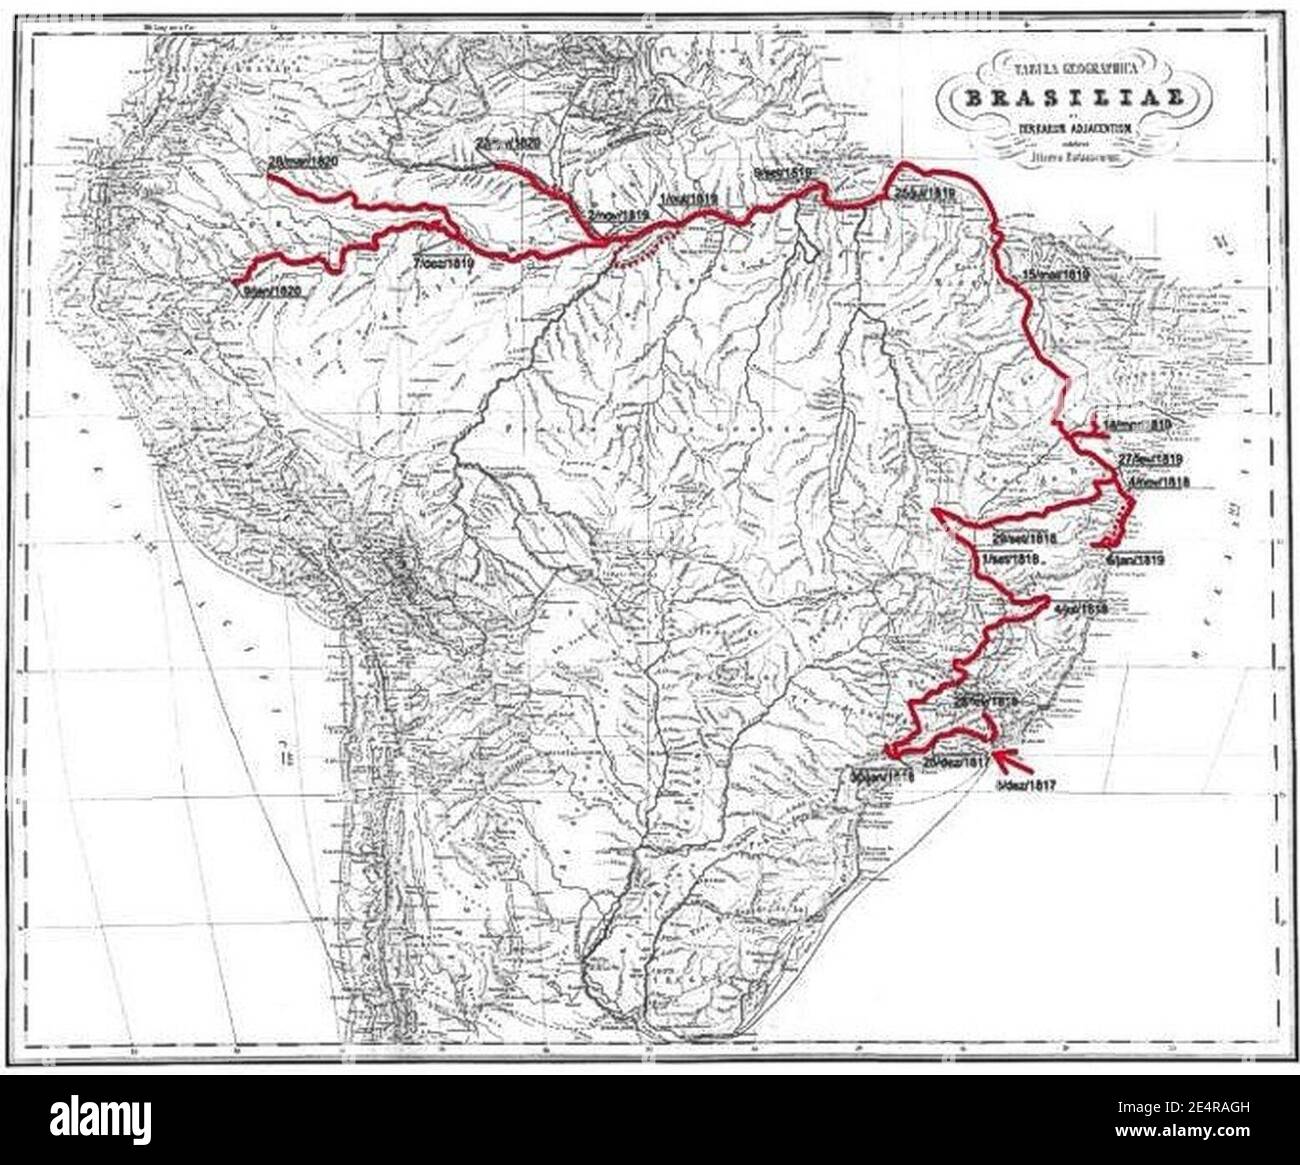 Martius and Spix route in Brazil 1817-1820. Stock Photo